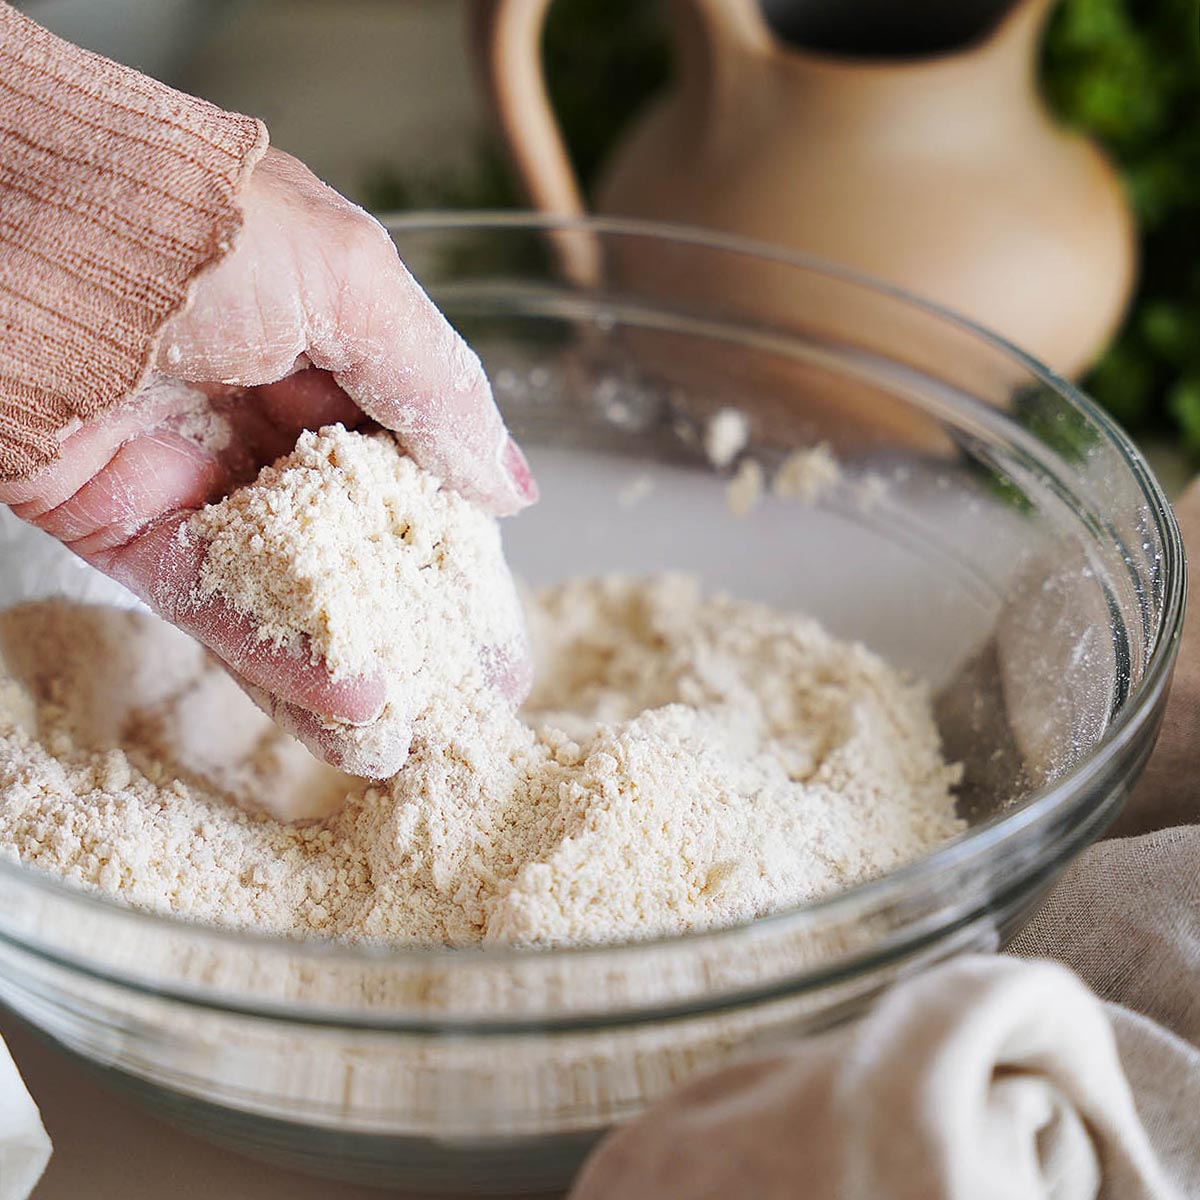 A hand mixing the flour in a bowl.